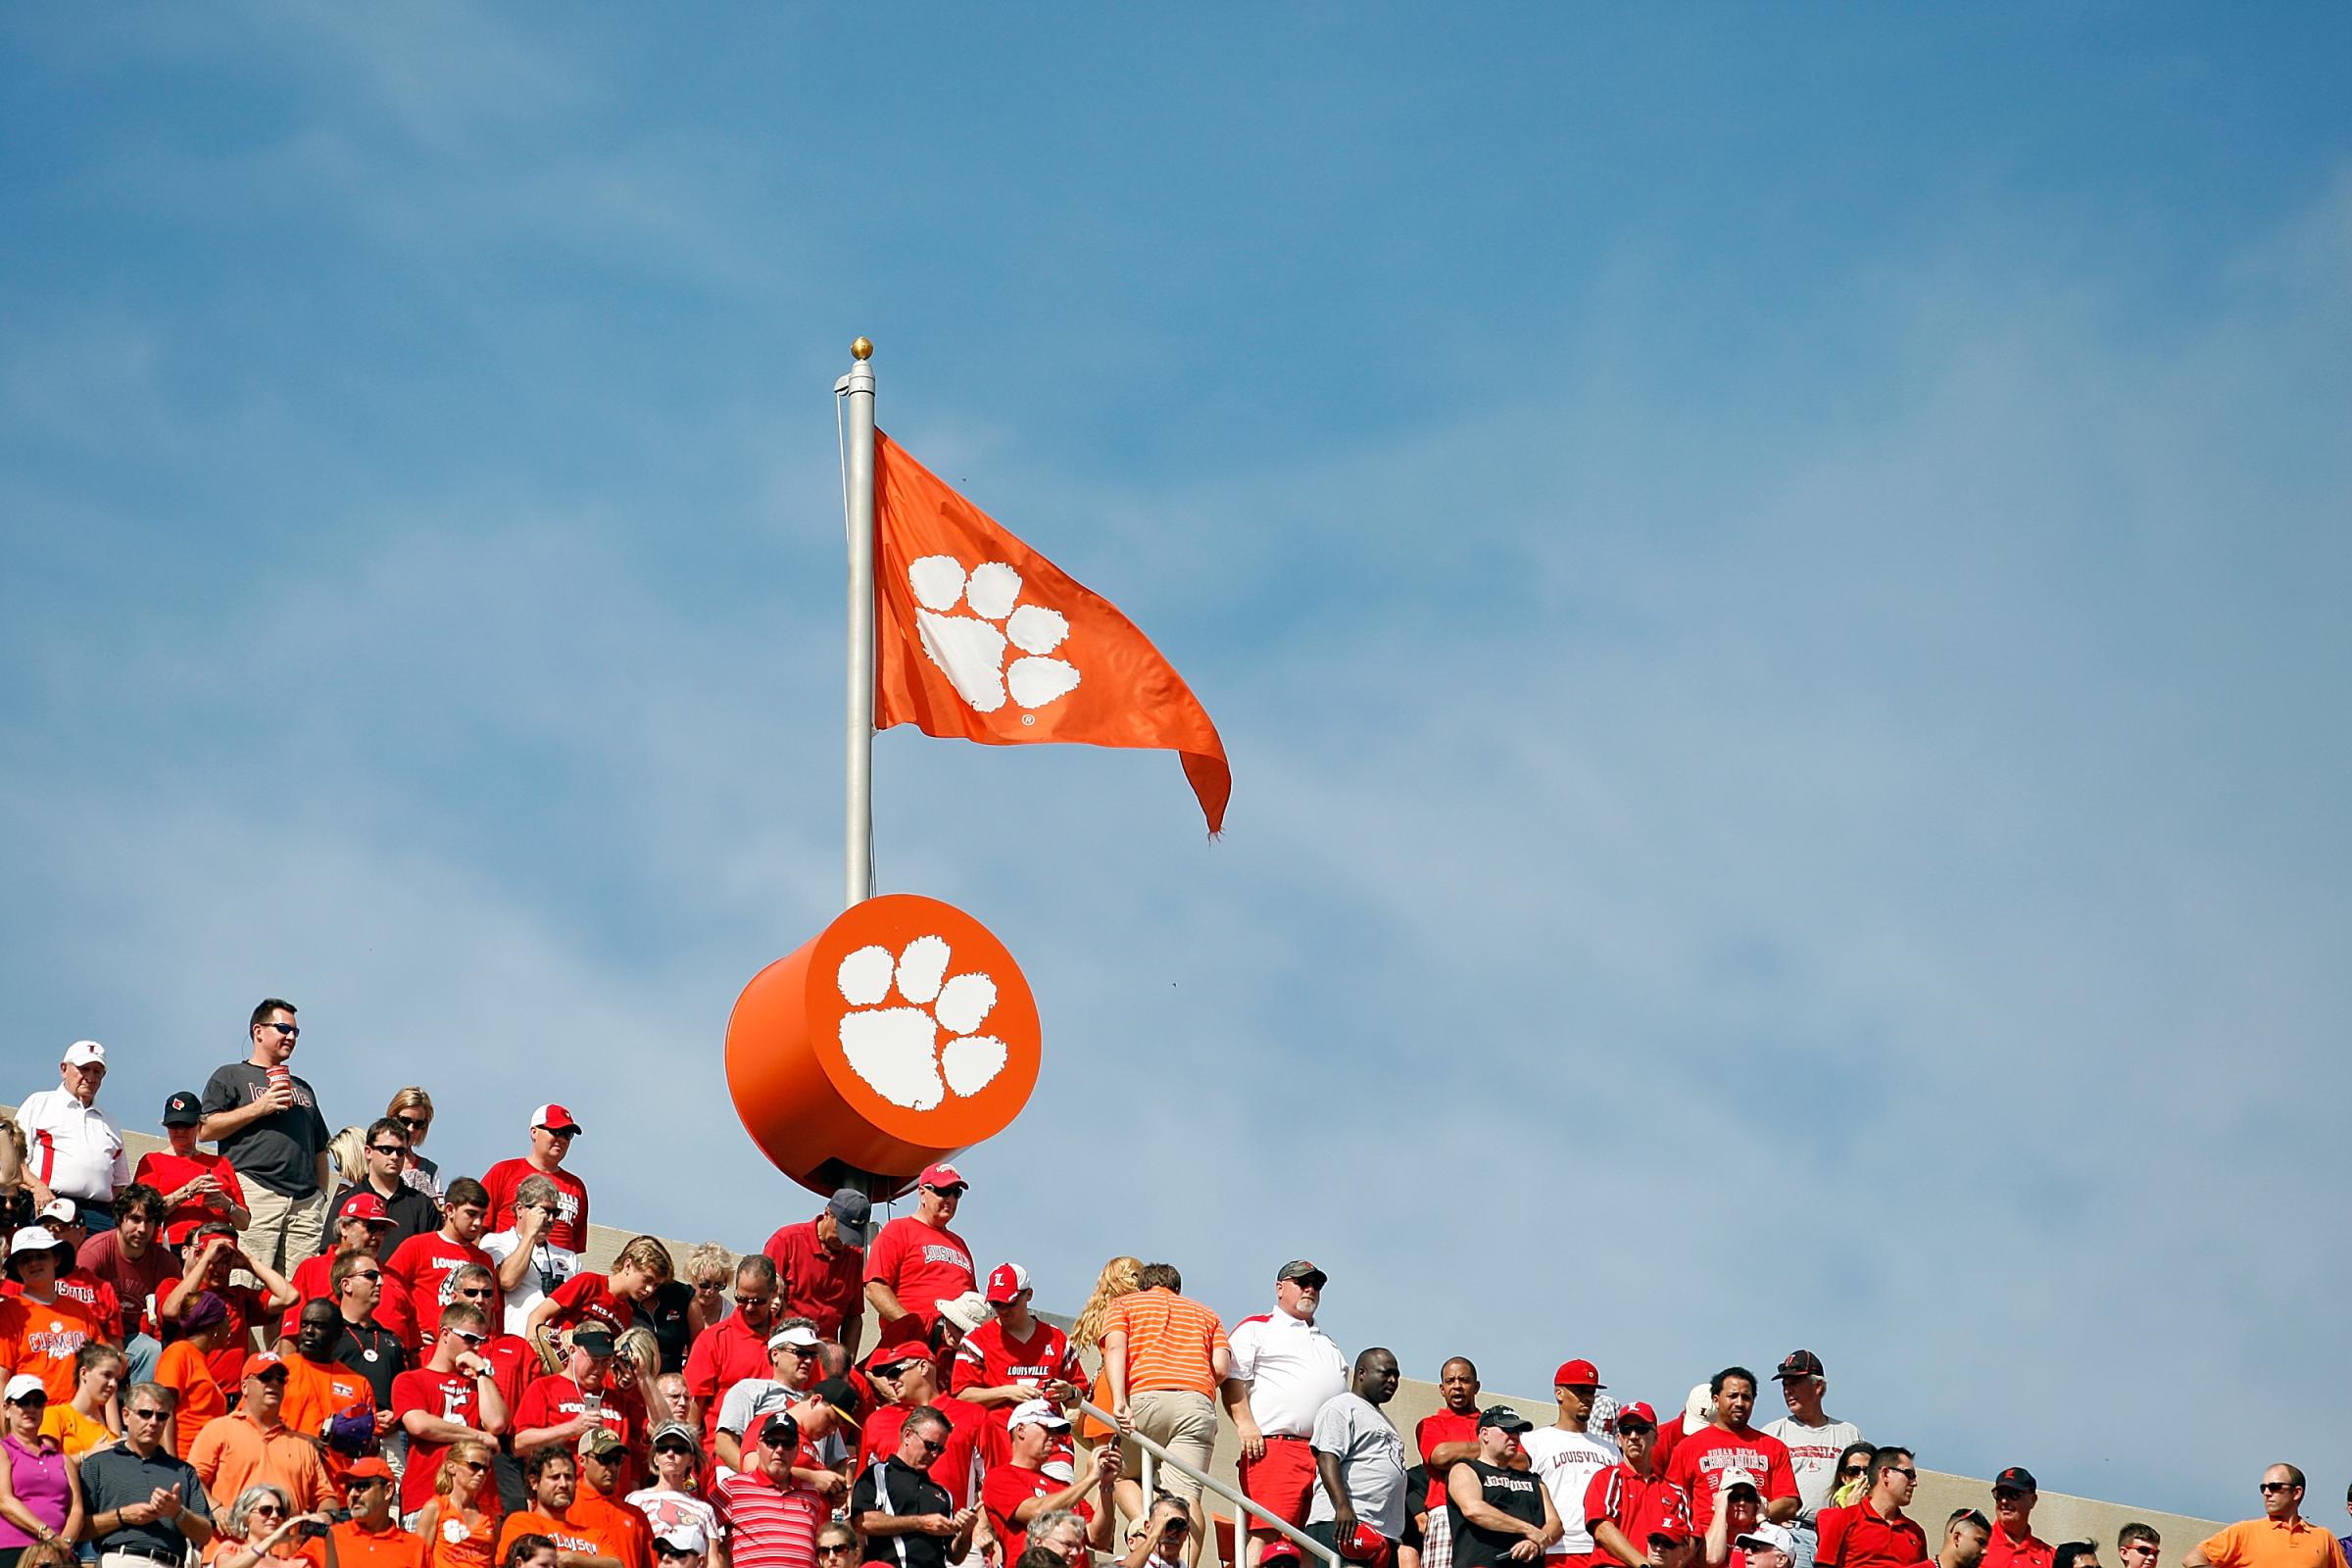 A Clemson flag flies above Memorial Stadium during the game between the Clemson Tigers and Louisville Cardinals in Clemson, S.C. on Oct. 11, 2014.